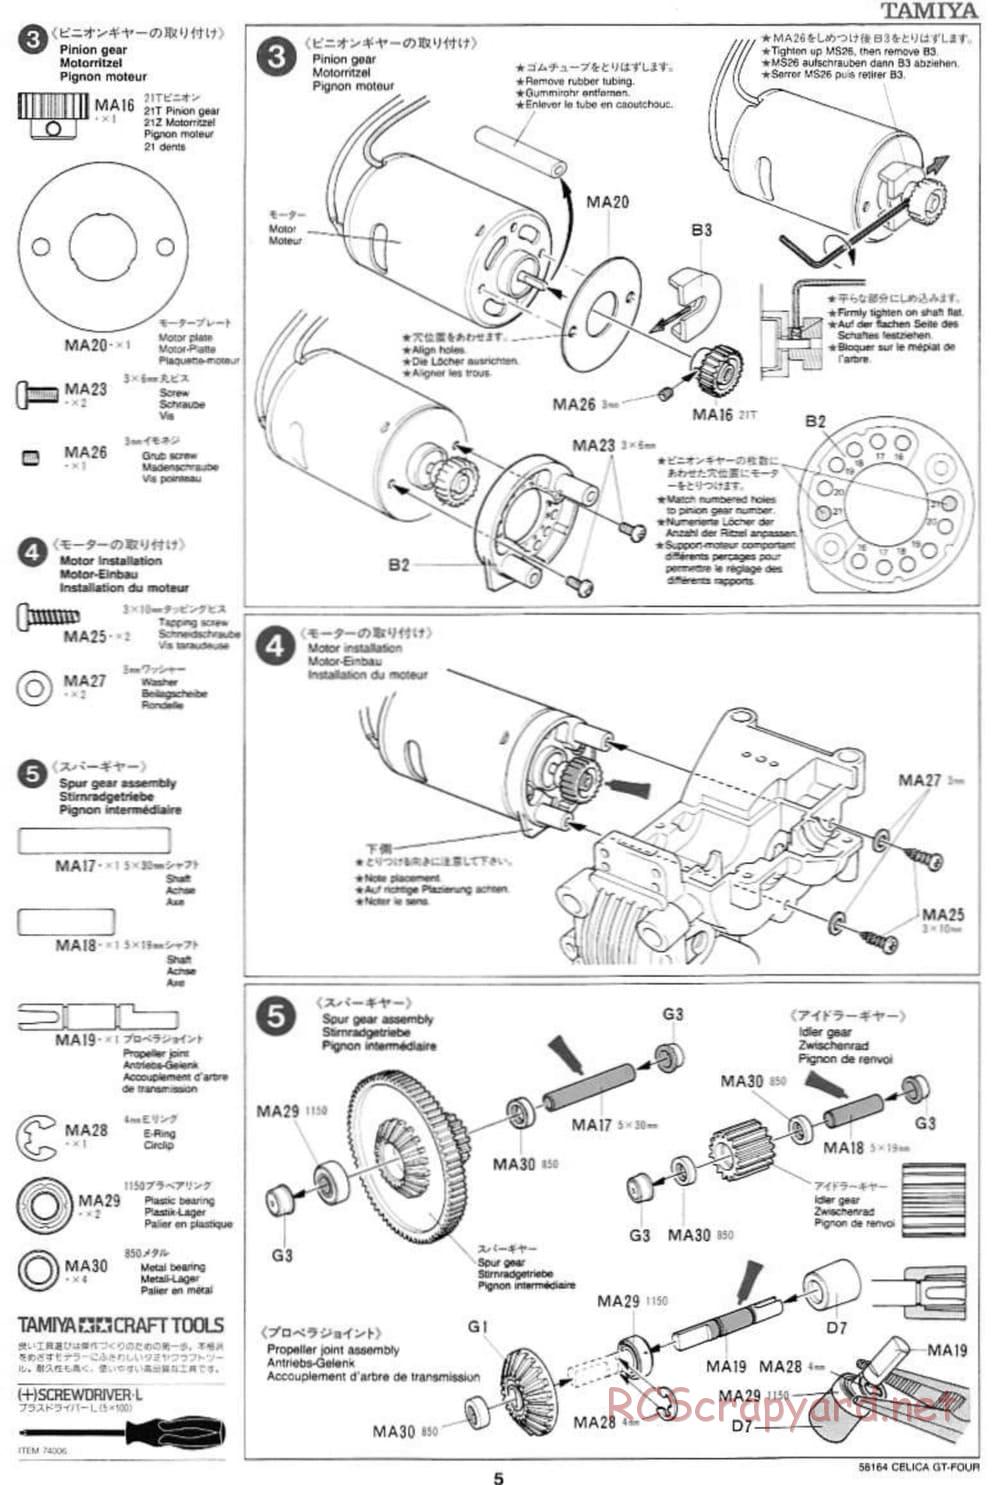 Tamiya - Toyota Celica GT Four - TA-02 Chassis - Manual - Page 5